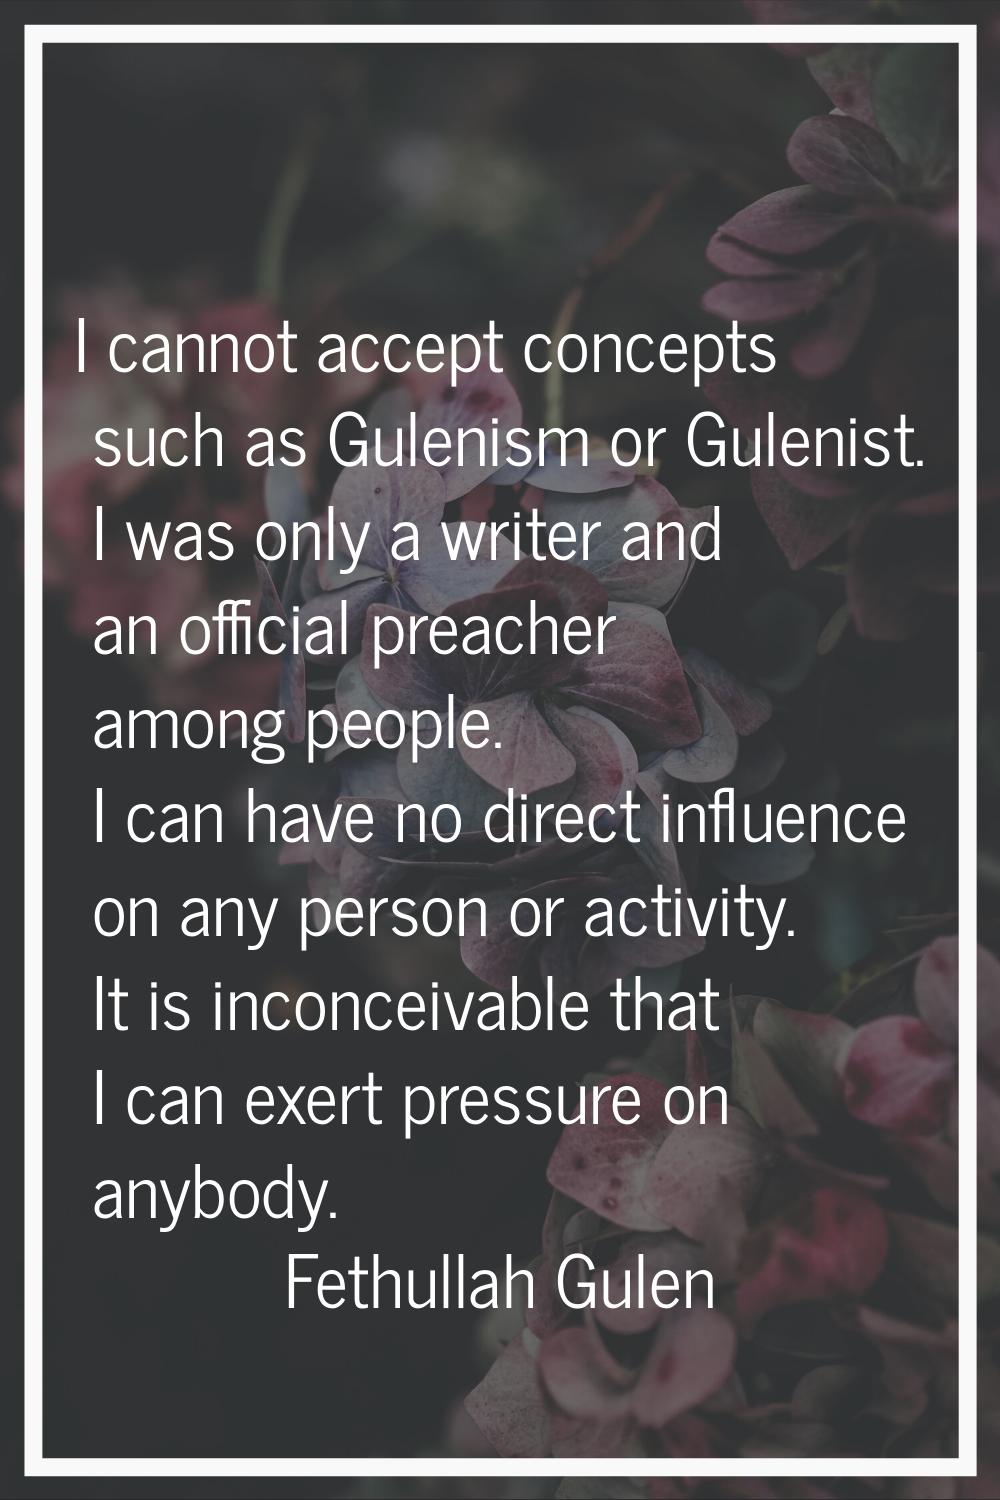 I cannot accept concepts such as Gulenism or Gulenist. I was only a writer and an official preacher